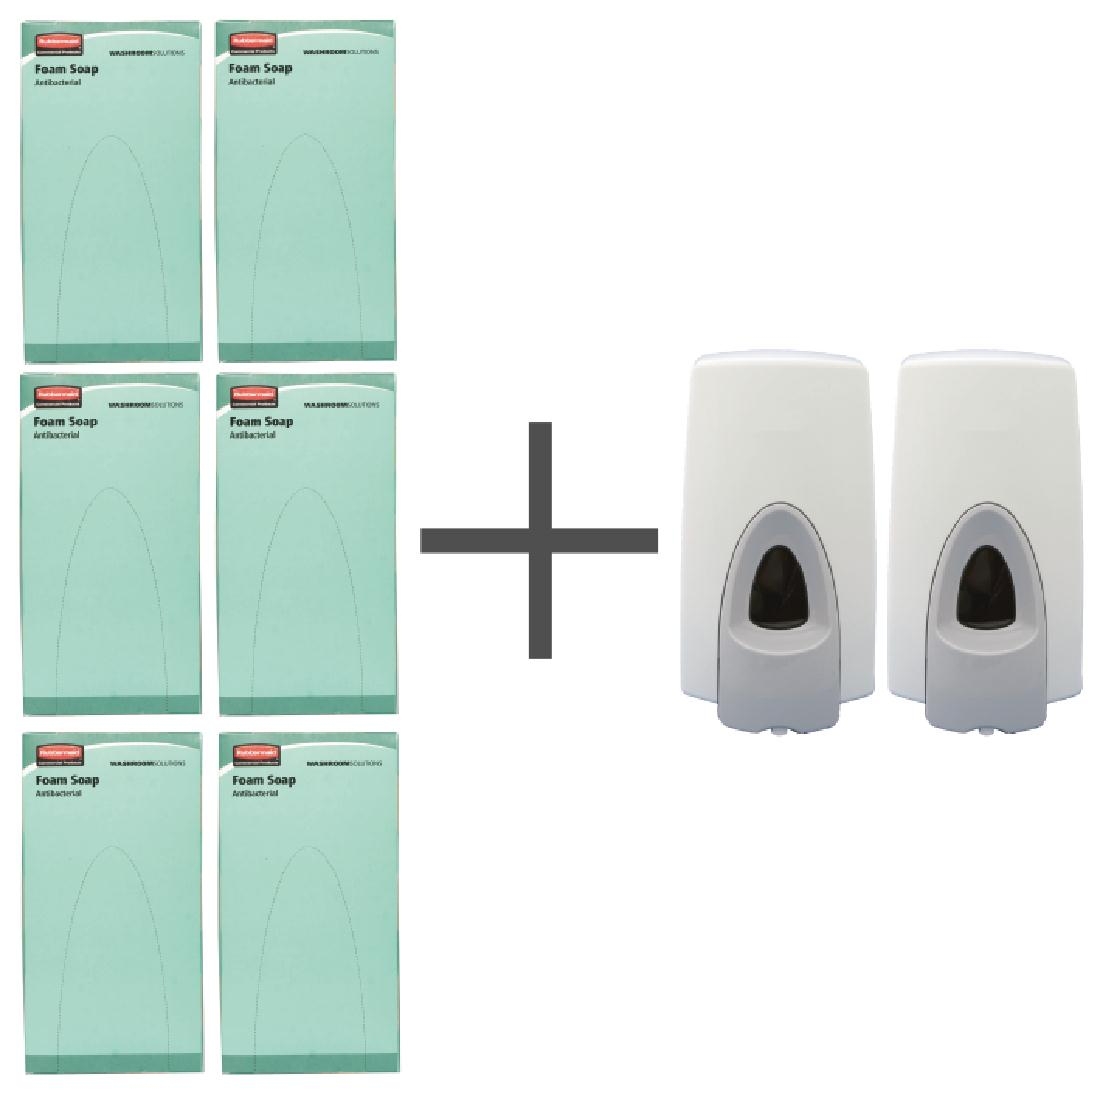 SALE OFFER 6 Rubbermaid Anti Bacterial Foam Soaps and 2 FREE Dispensers